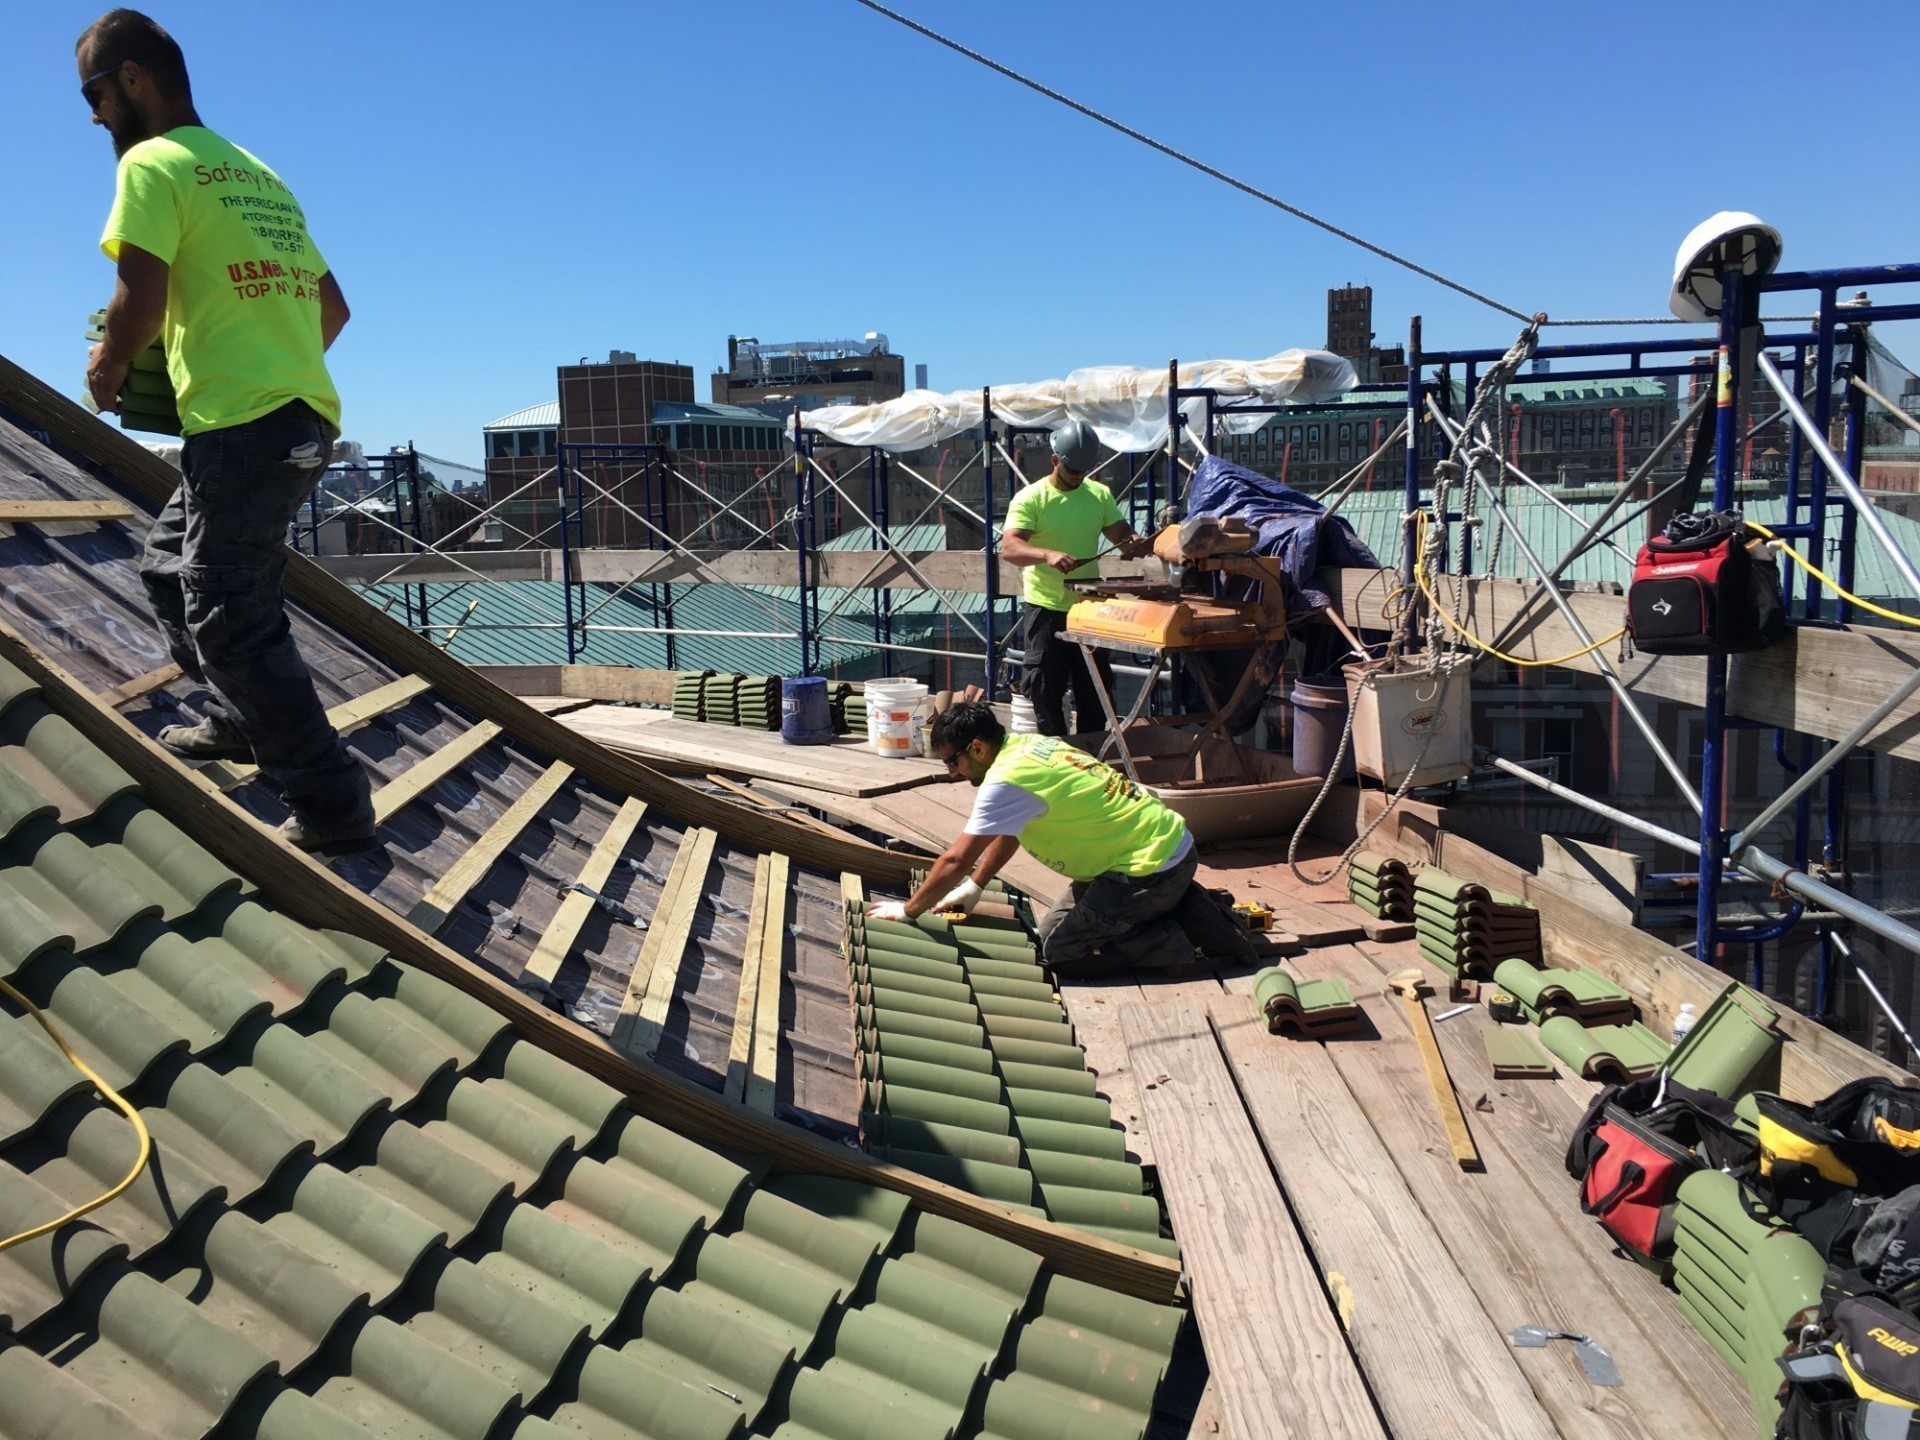 Workers replacing terra cotta roof tiles on top of the Chapel's roof during a cloudless, sunny day.